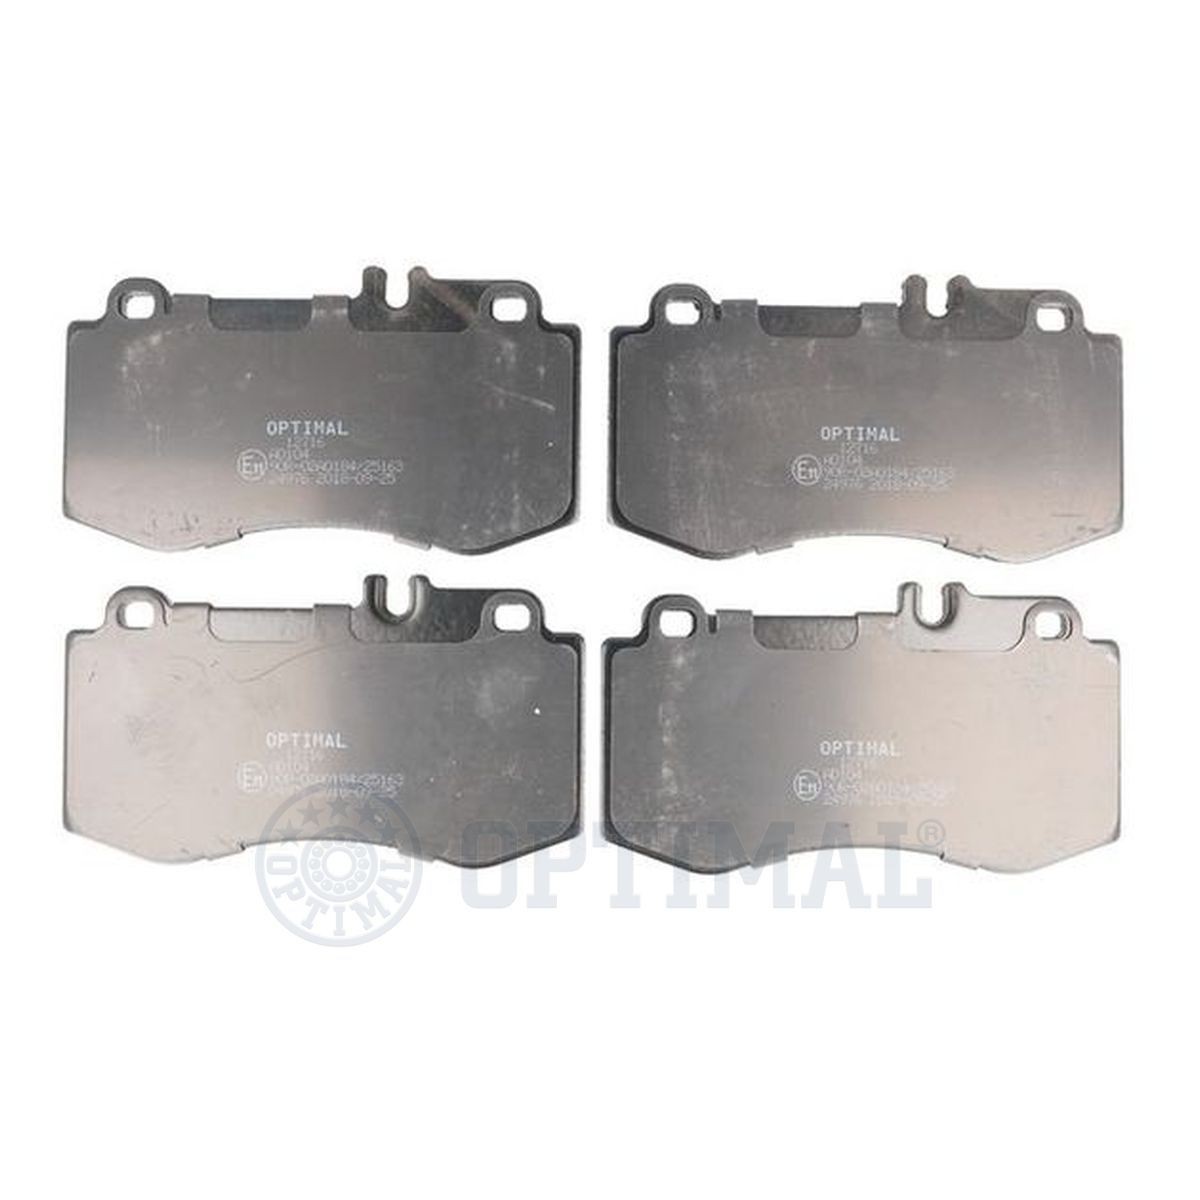 OPTIMAL 12716 Brake pad set Front Axle, prepared for wear indicator, excl. wear warning contact